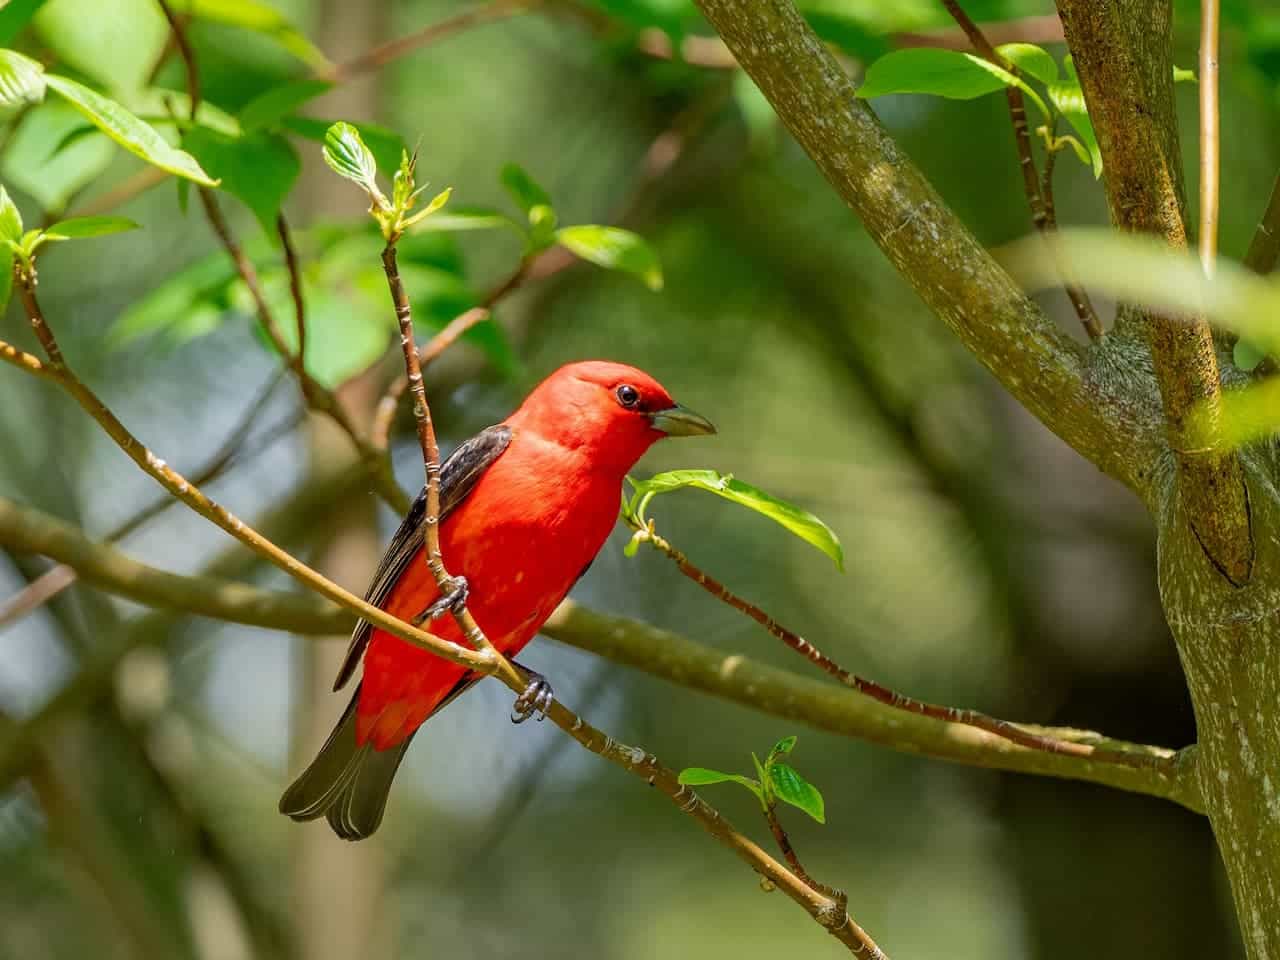 The Red Reddish Tanagers Perched On A Thorn of A Wood